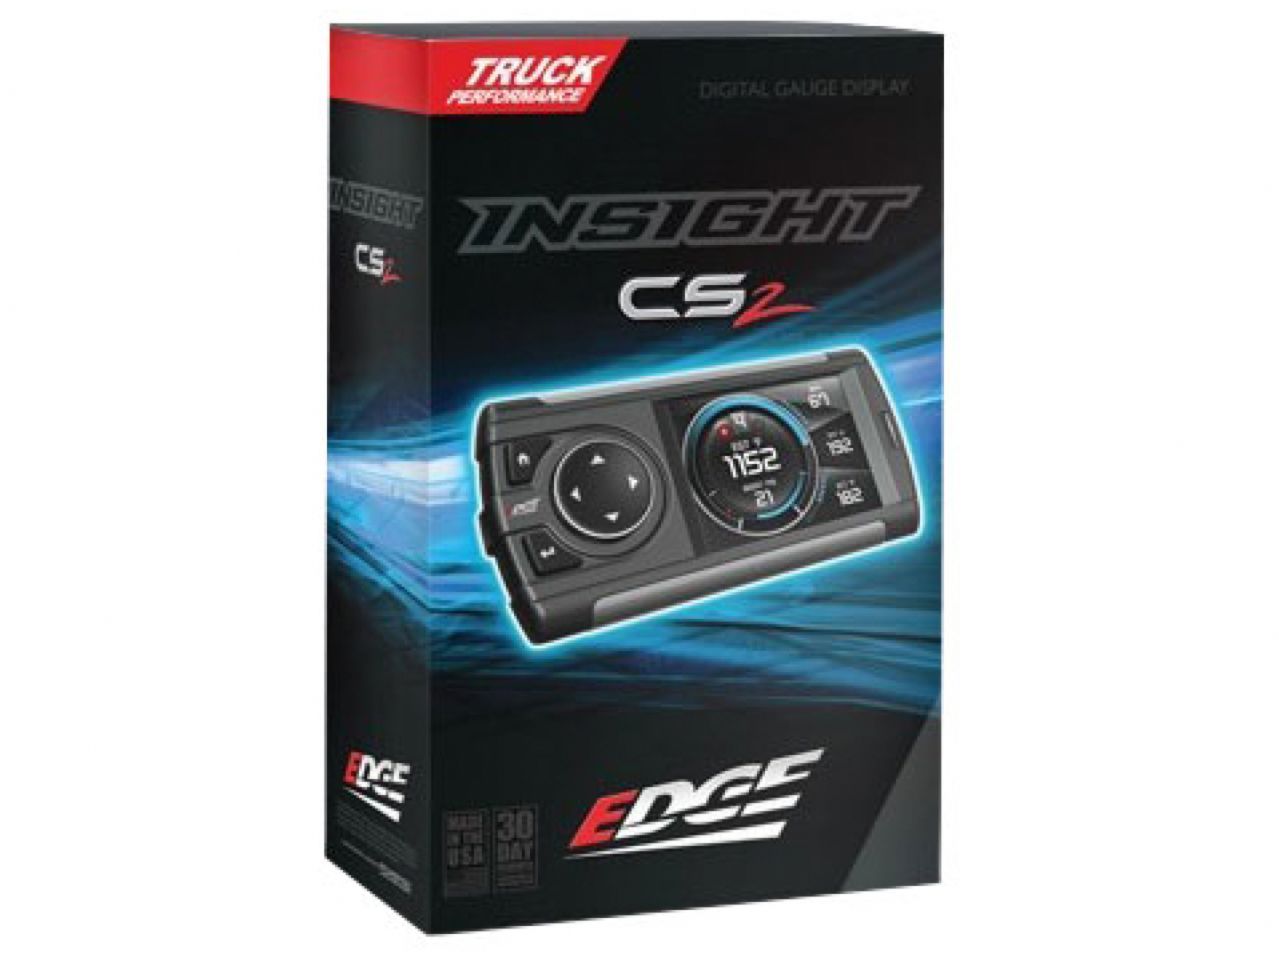 Edge Insight Cs2 Monitor (1996 & Newer Obdii Enabled Vehicle)